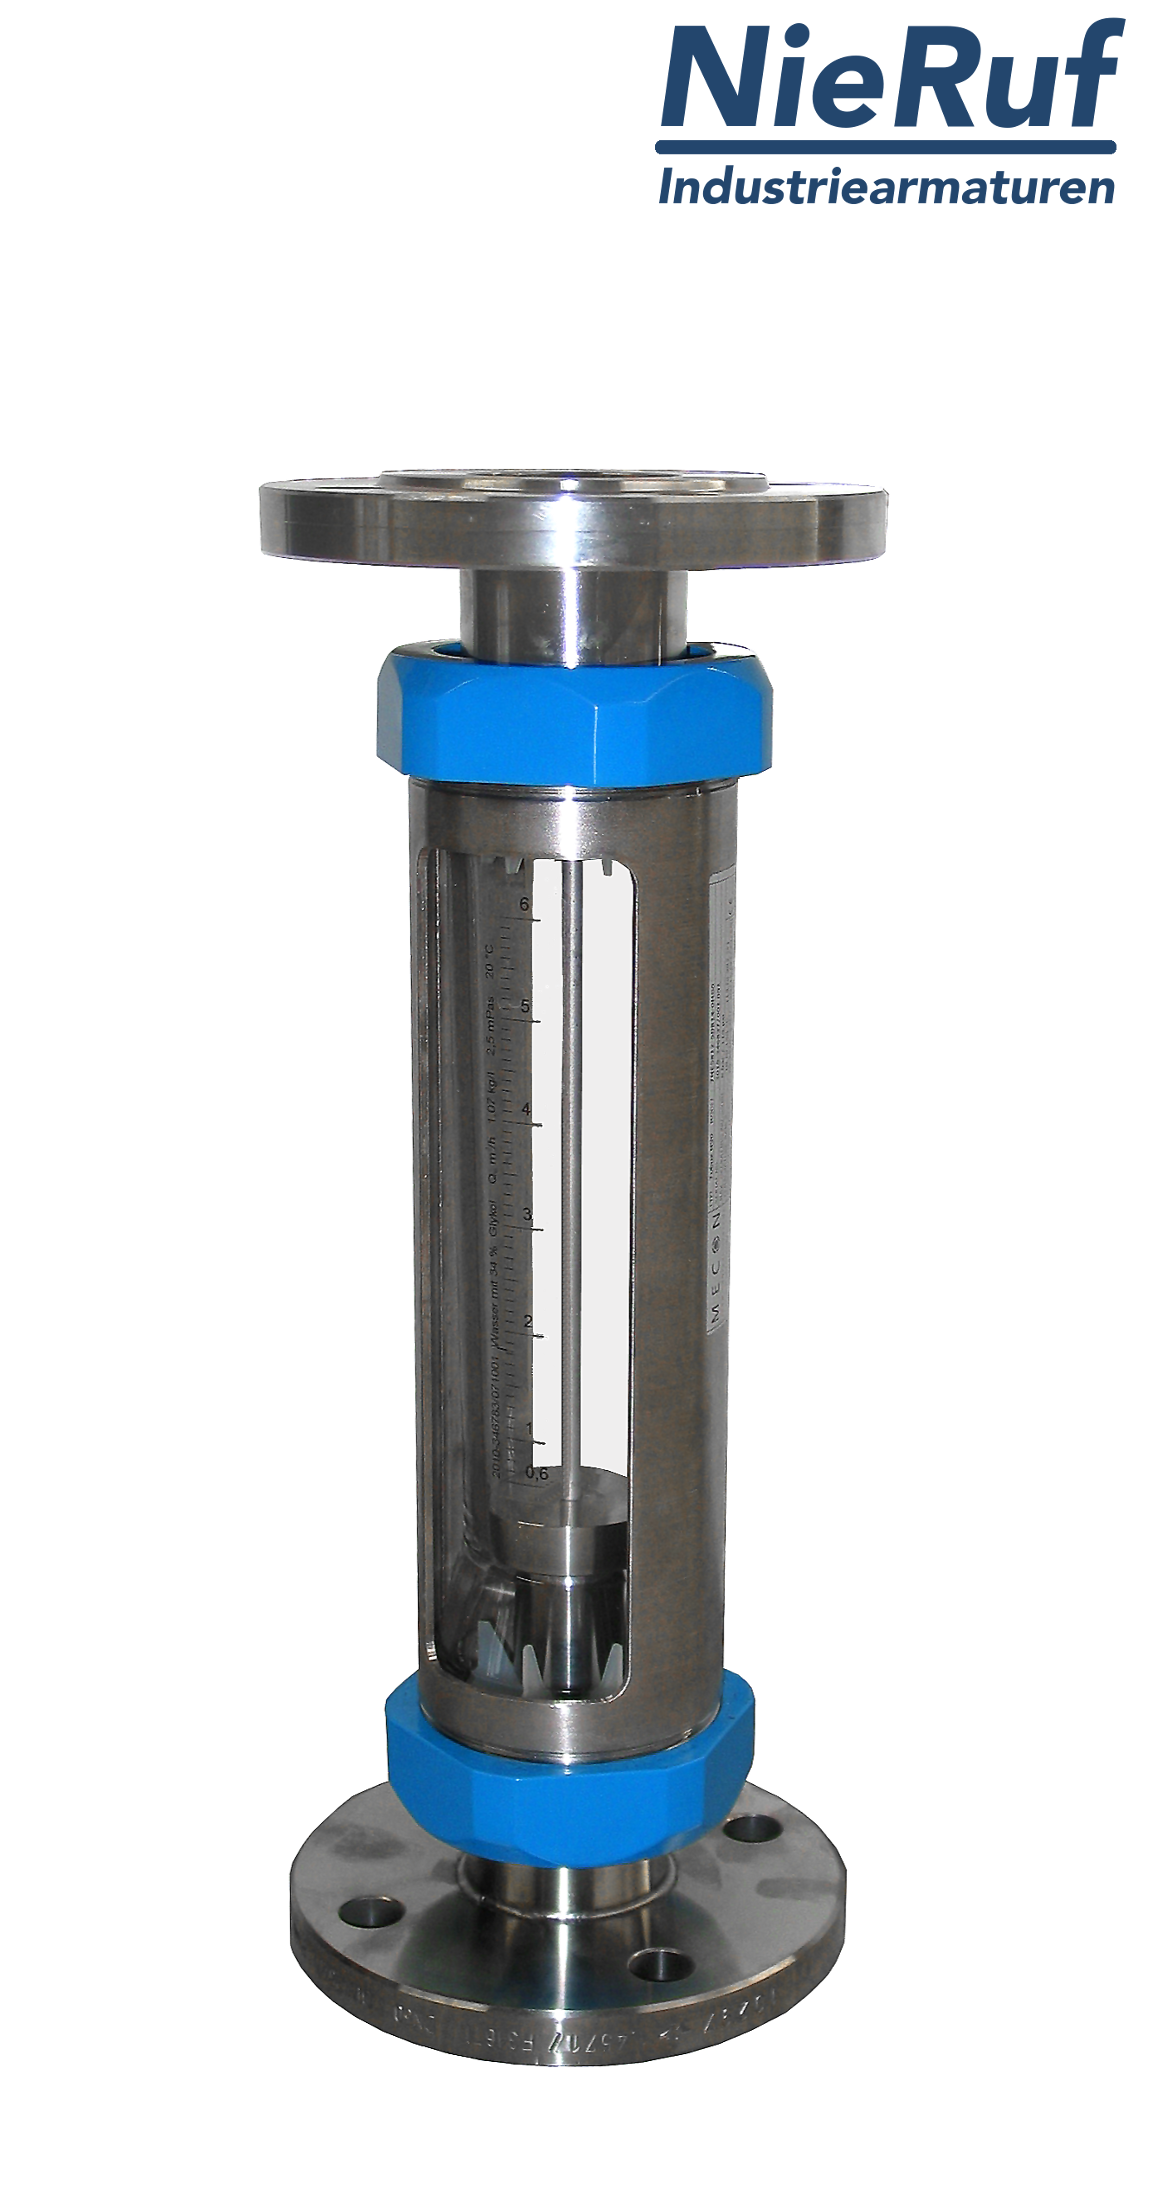 Variable area flowmeter stainless steel + borosilicate flange DN15 12.5 - 125.0 l/h water FKM